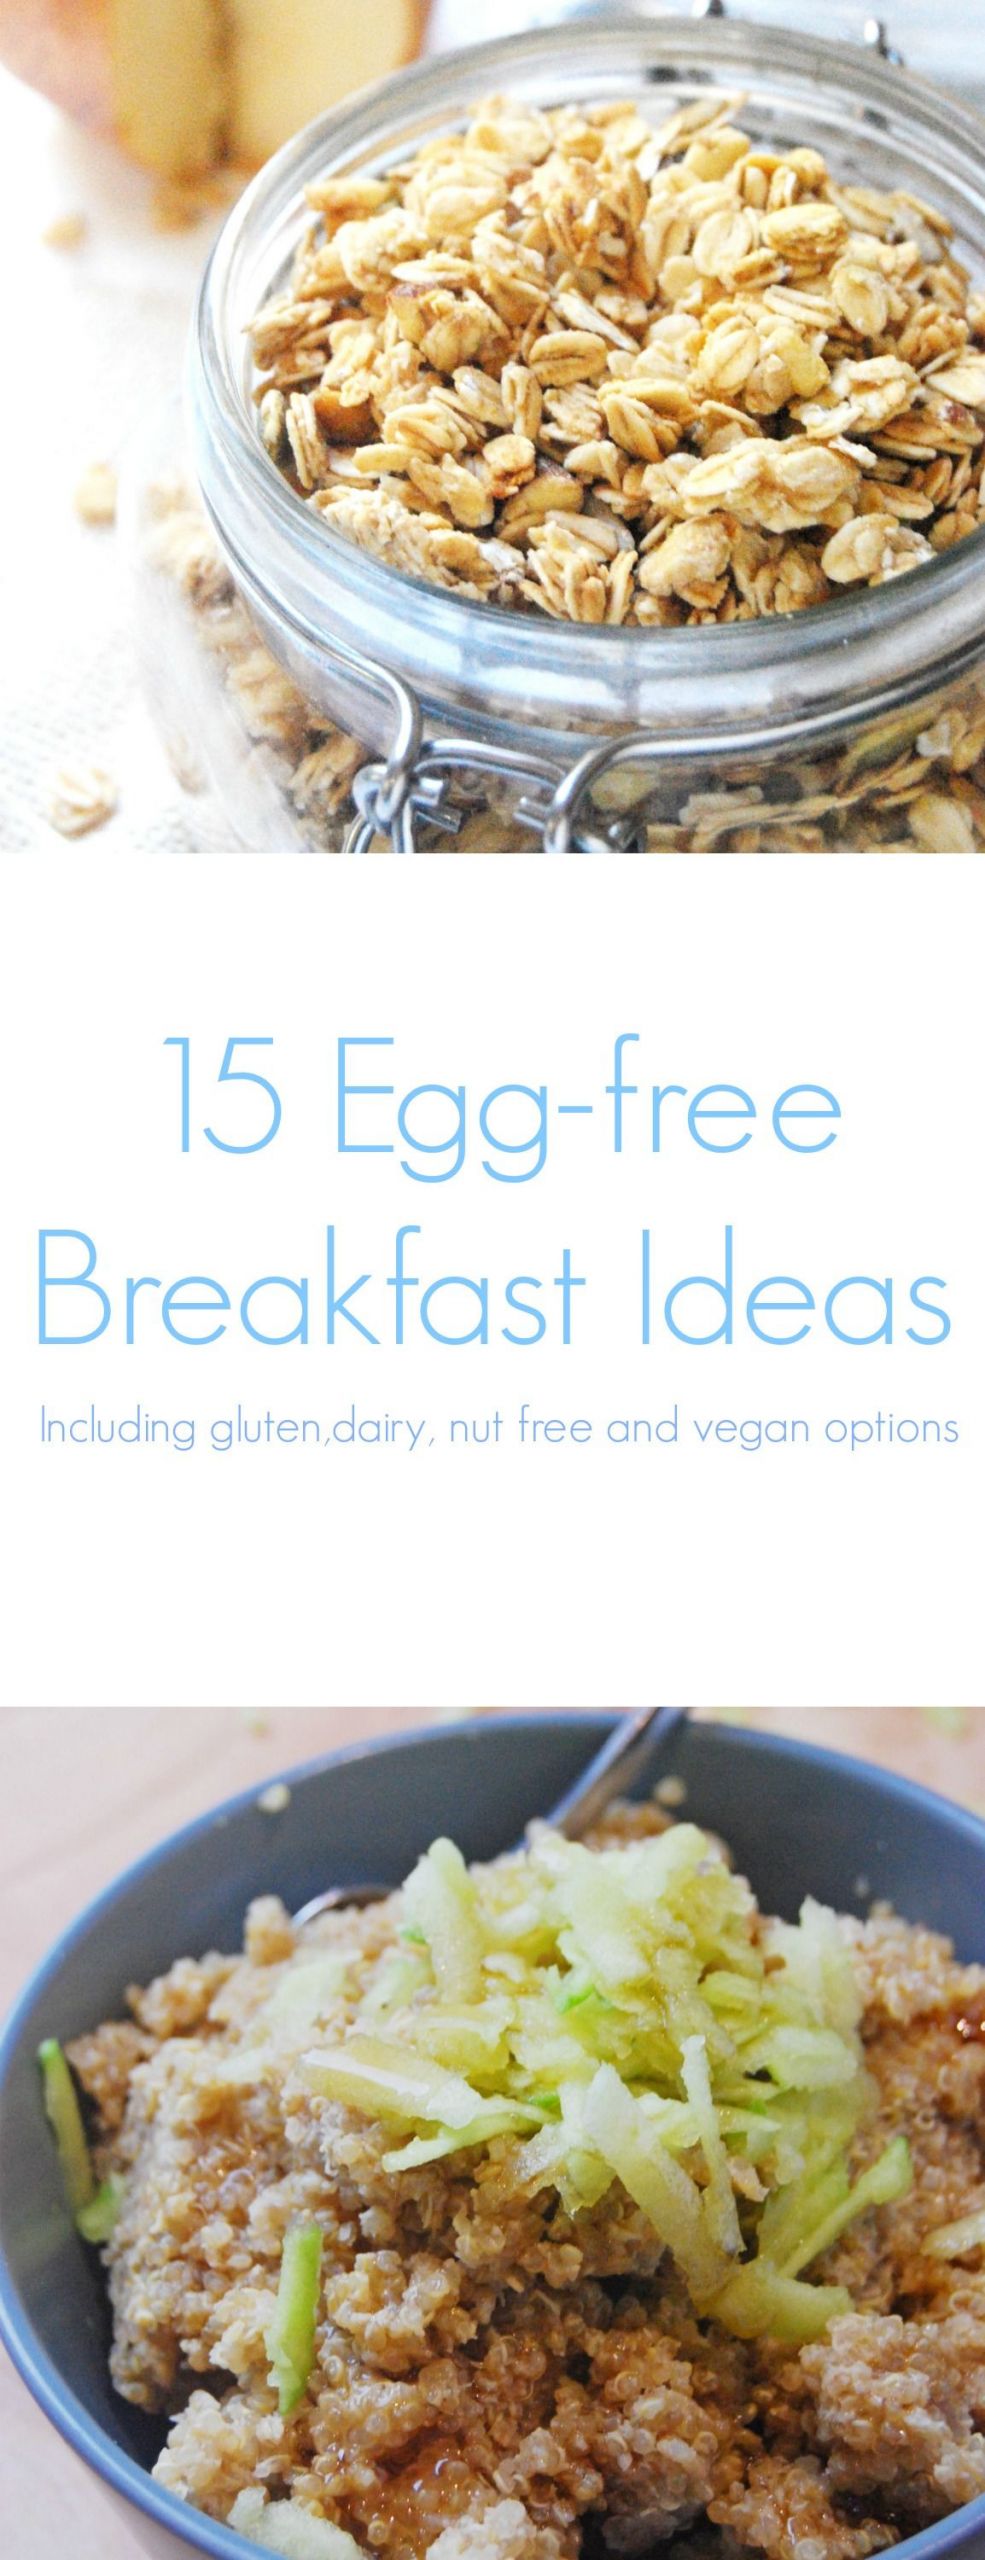 Dairy And Egg Free Breakfast Recipes
 15 Egg free Breakfast Ideas many of which are also gluten